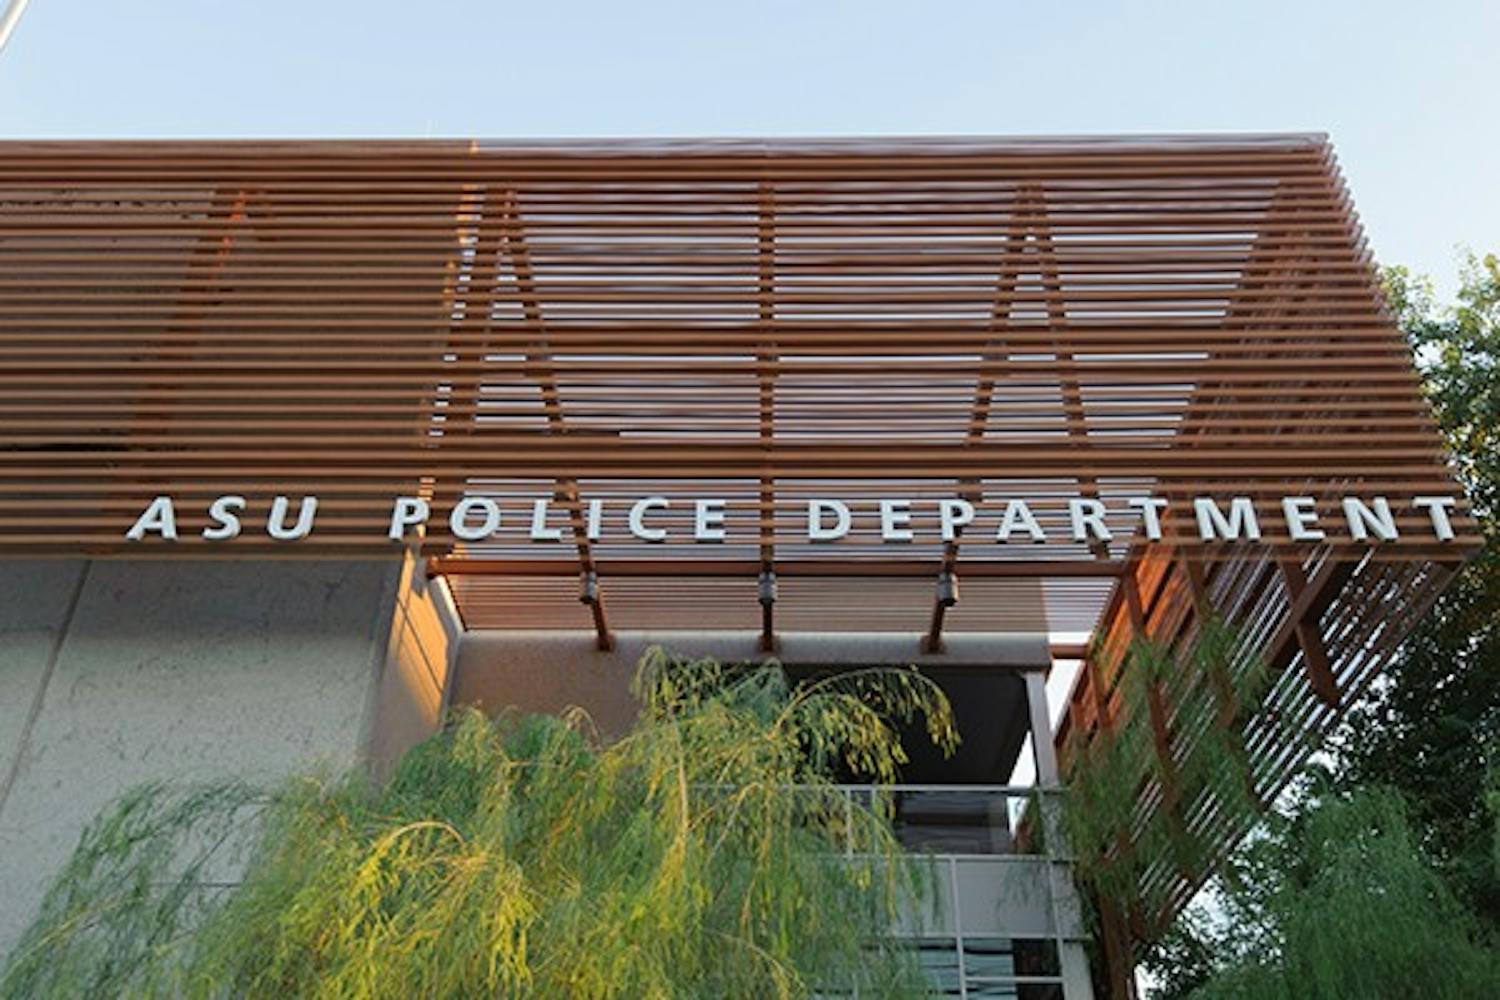 The ASU Police Department headquarters is seen in Tempe on Tuesday, Sept. 30, 2014. The department is under criticism for acquiring 70 M-16 assault rifles through a Pentagon surplus program. (Photo by Ben Moffat)